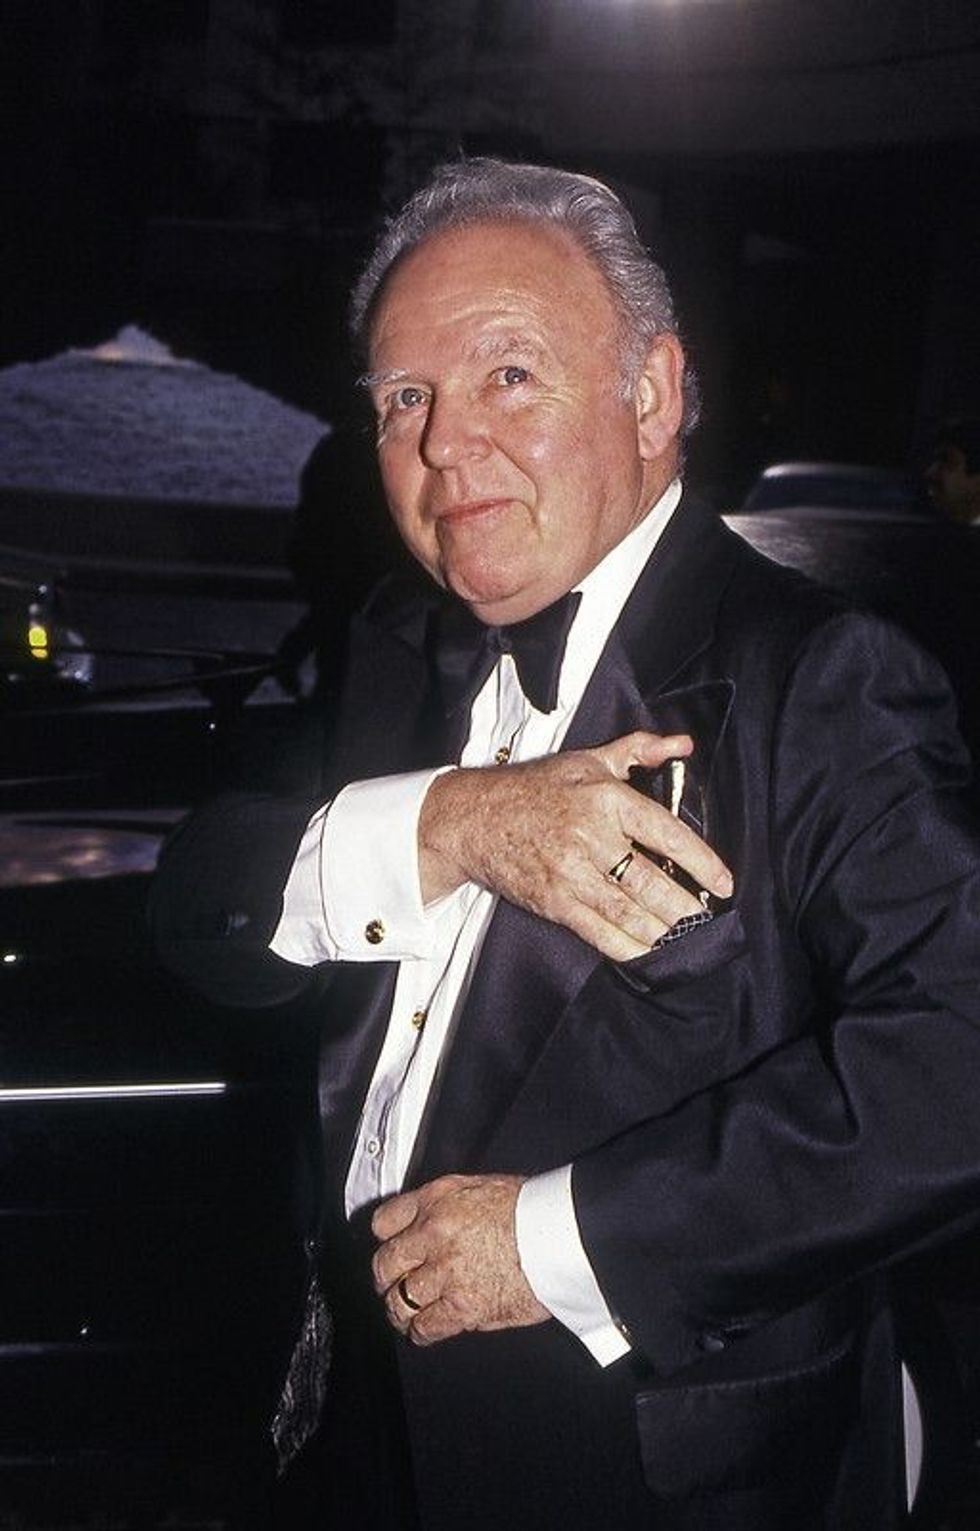 Late actor Carroll O'Connor arriving at a formal celebrity event